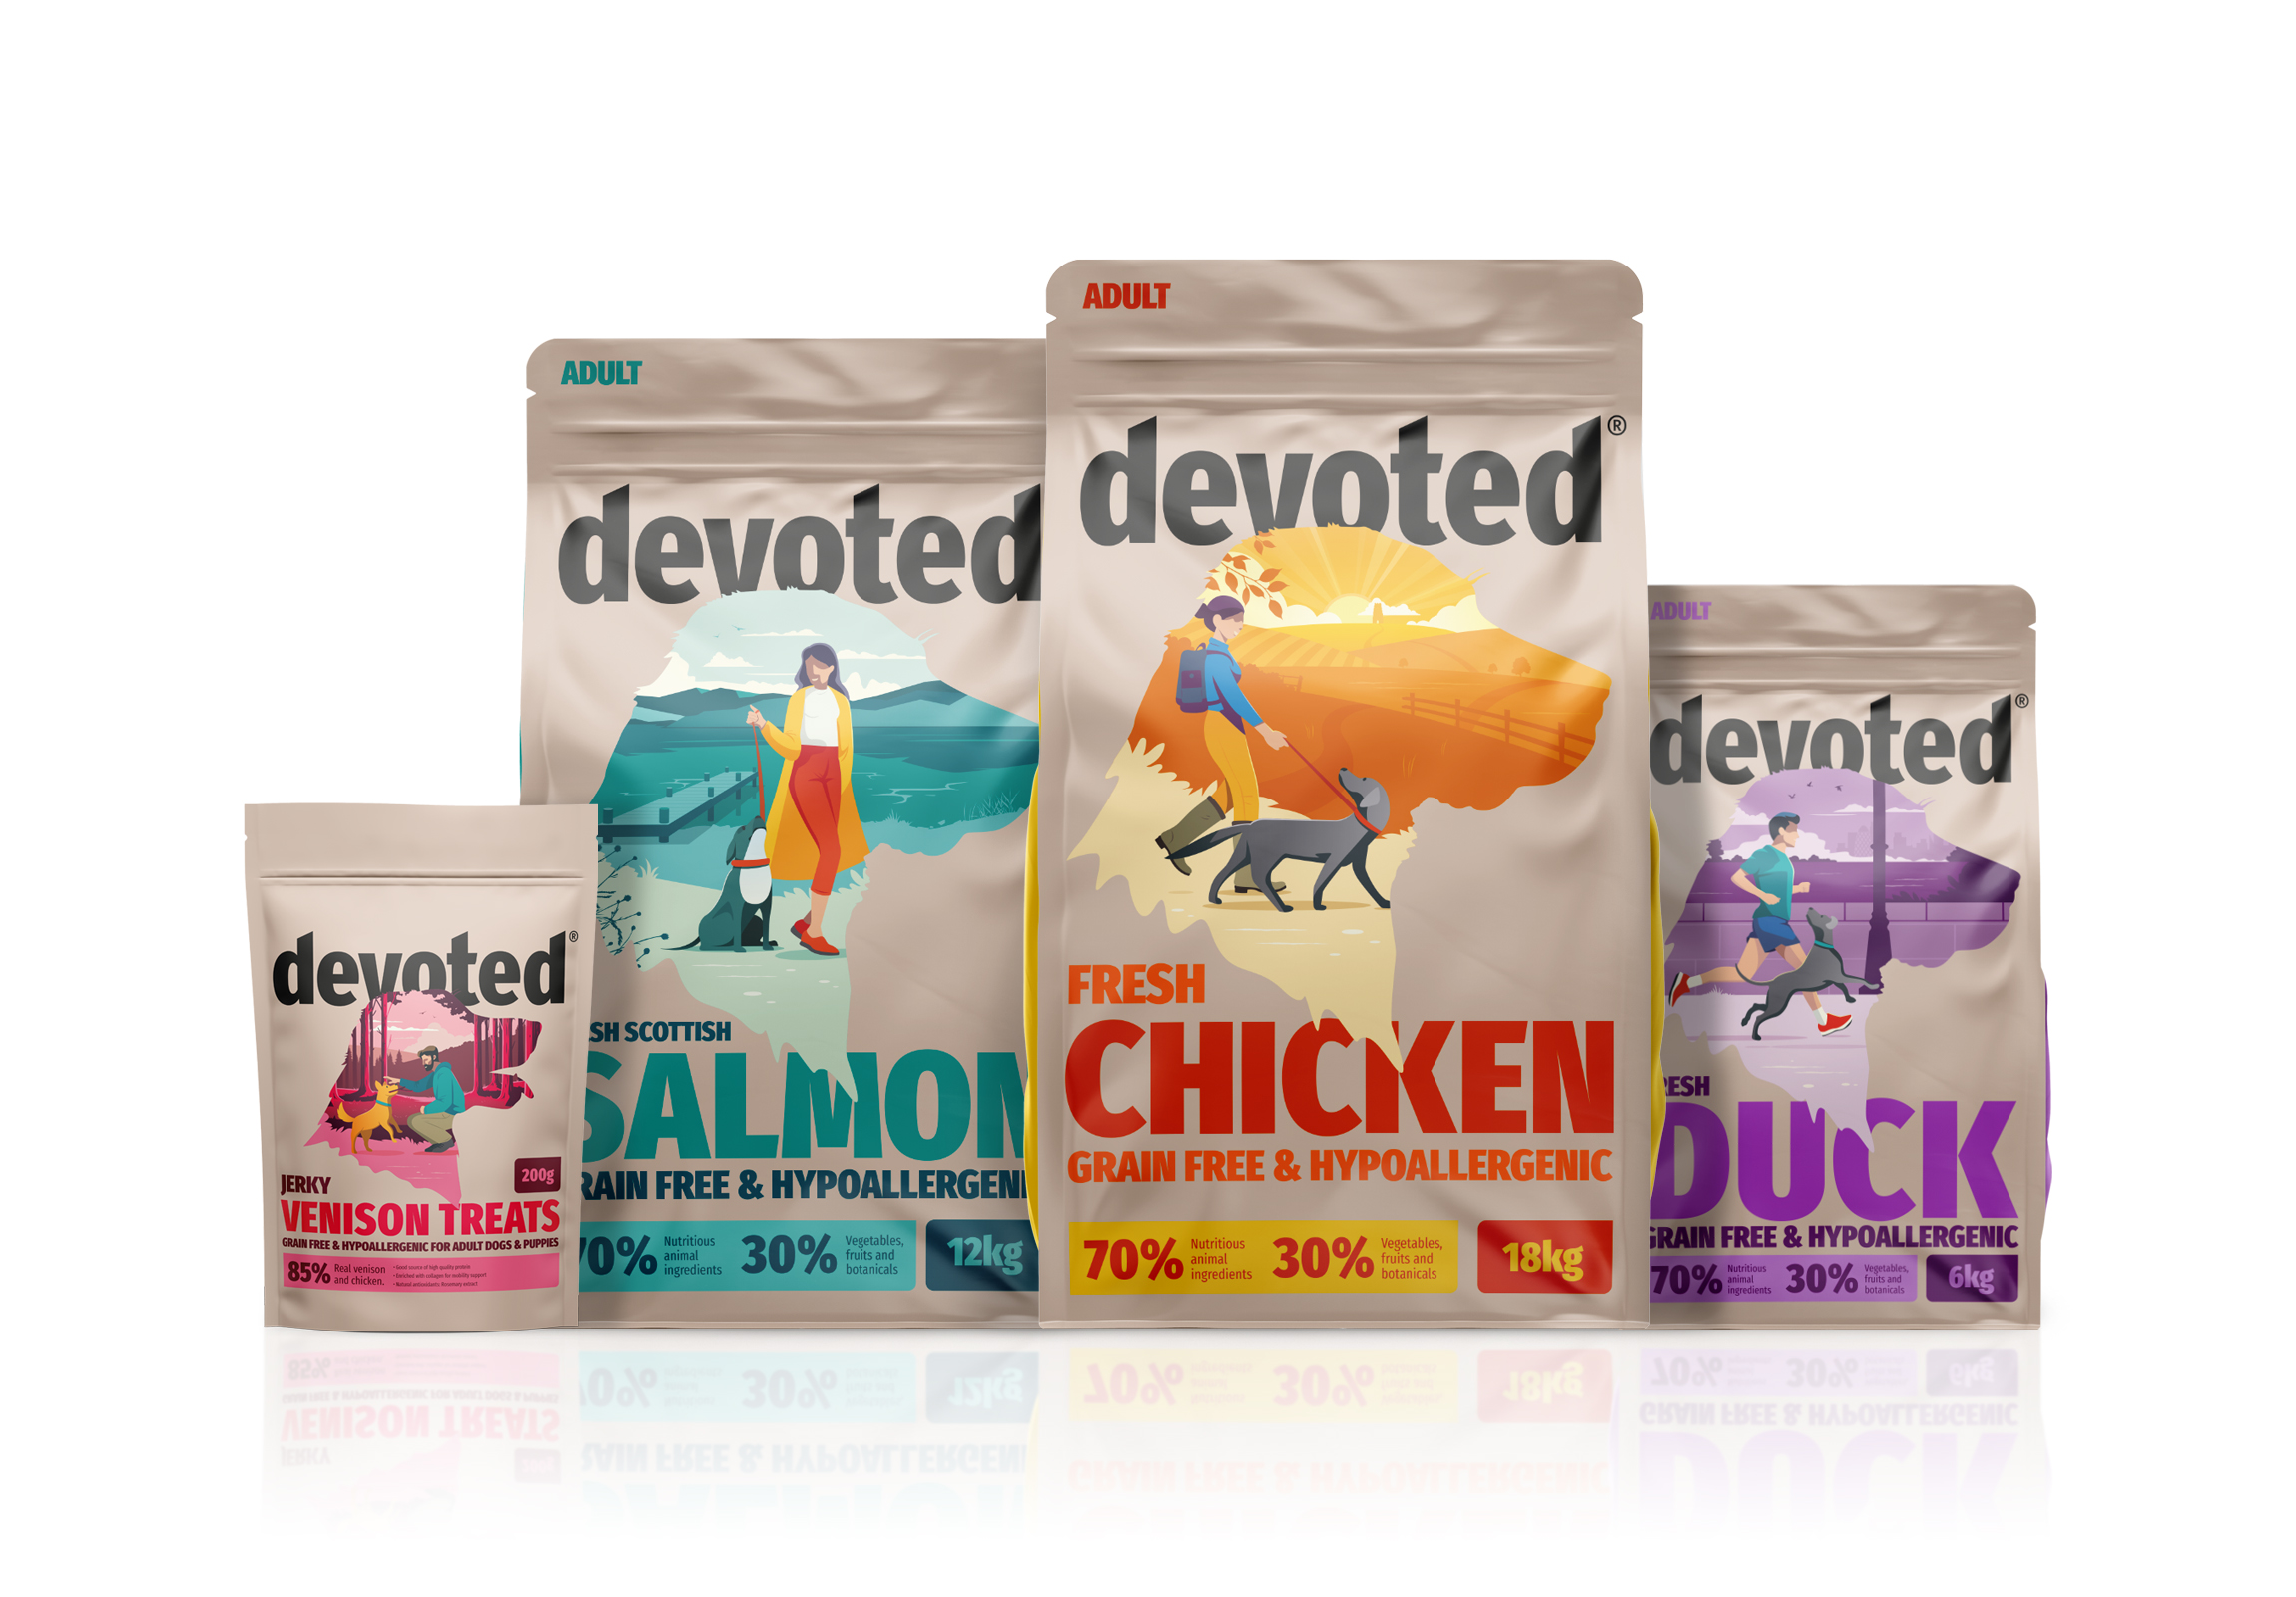 Branding and Packaging Design for Devoted Pet Food by Pencil Studio